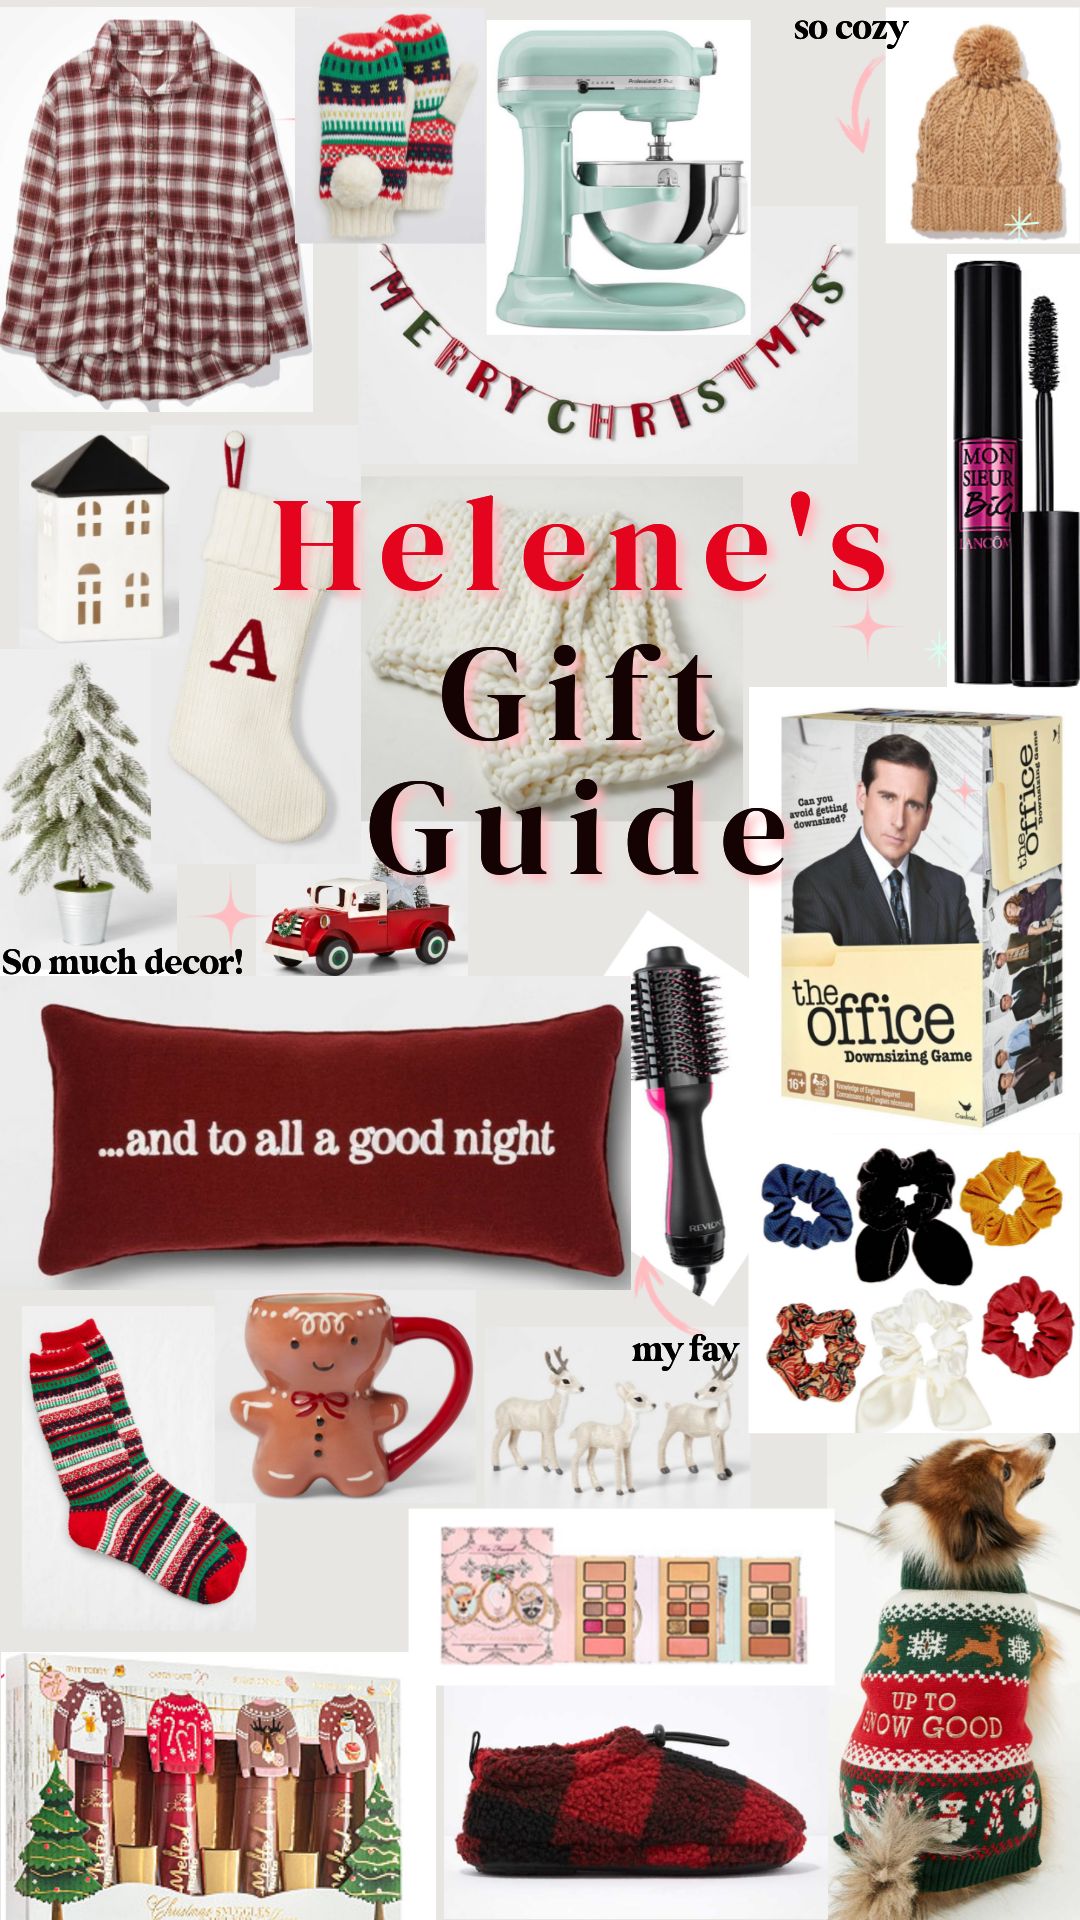 Cheap Holiday Gifts 2020 - Best Christmas Gifts Under $10